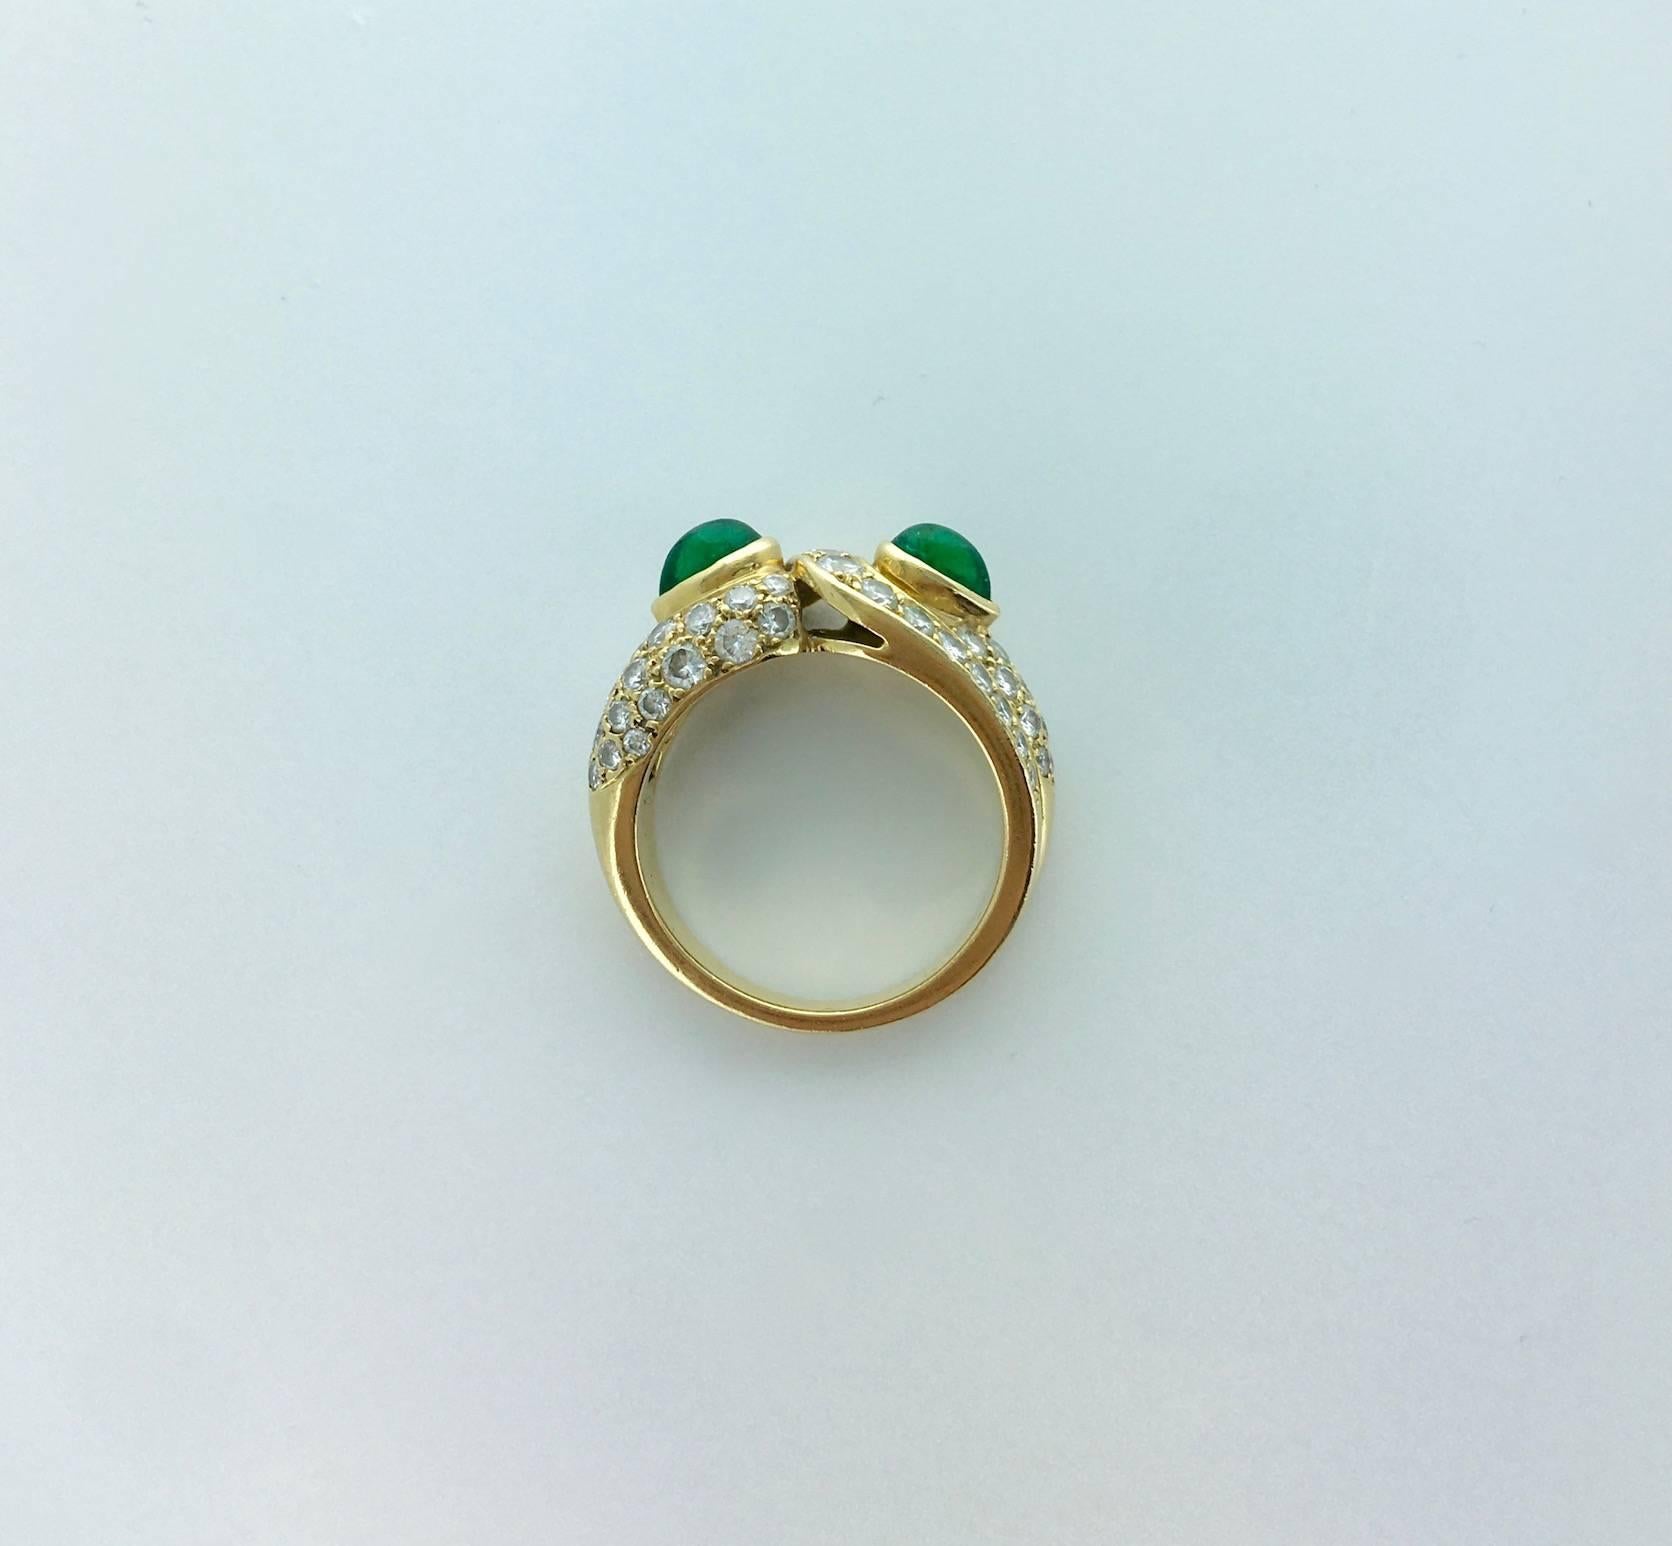 A beautifully designed two cabochon Pear-shape Emerald and diamond pave mounted on yellow gold 18k 750 ring.
Circa 1980.
French assay marks and maker's mark.
Signed Boucheron, numbered.

Gross weight: 7.53 grams
